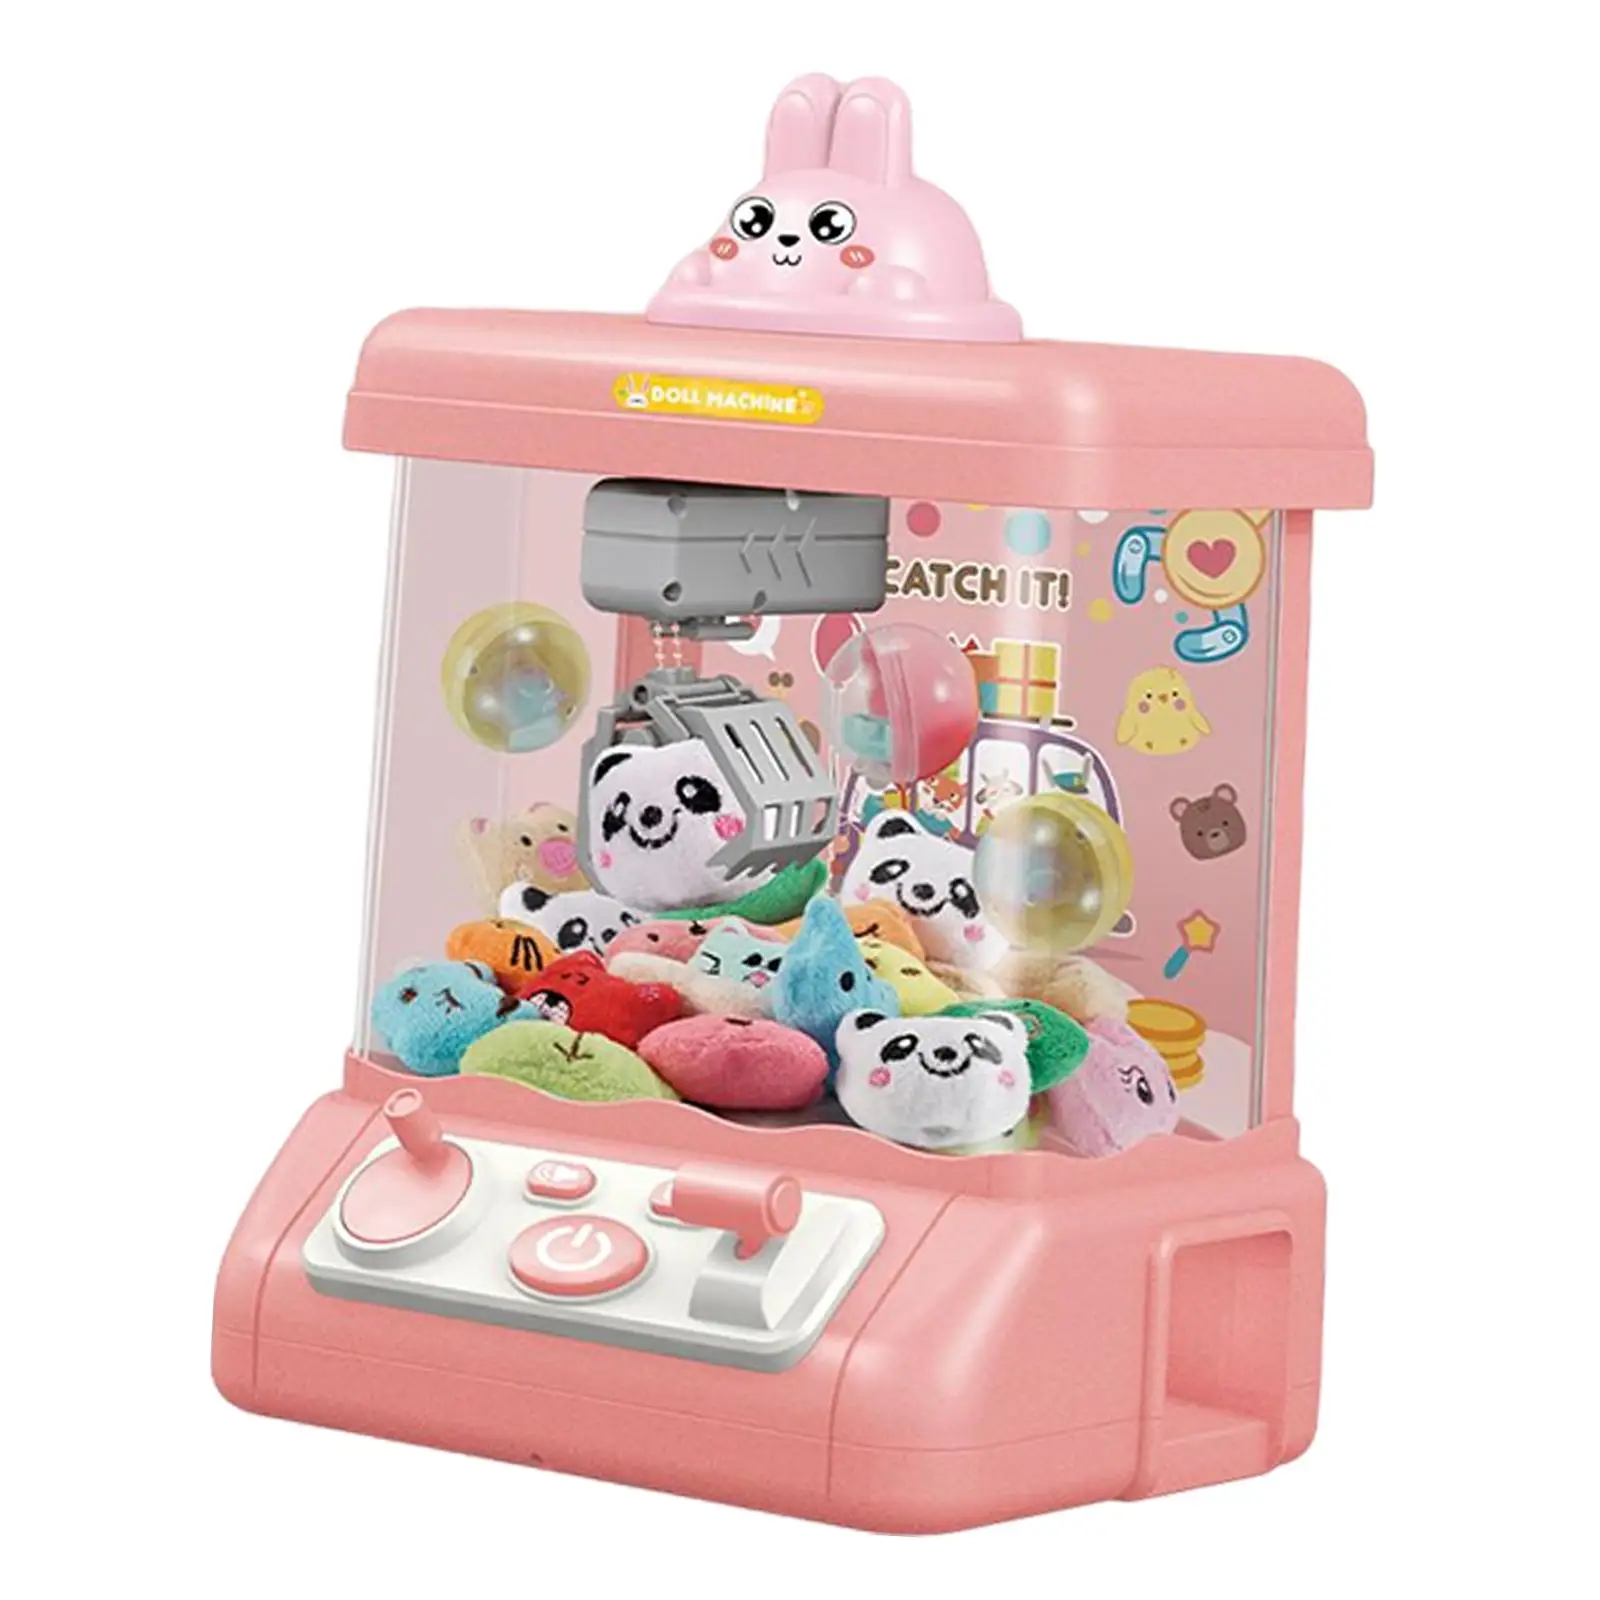 Claw Machine Electronic Arcade Game Catching Doll Machine for Birthday Gifts Children